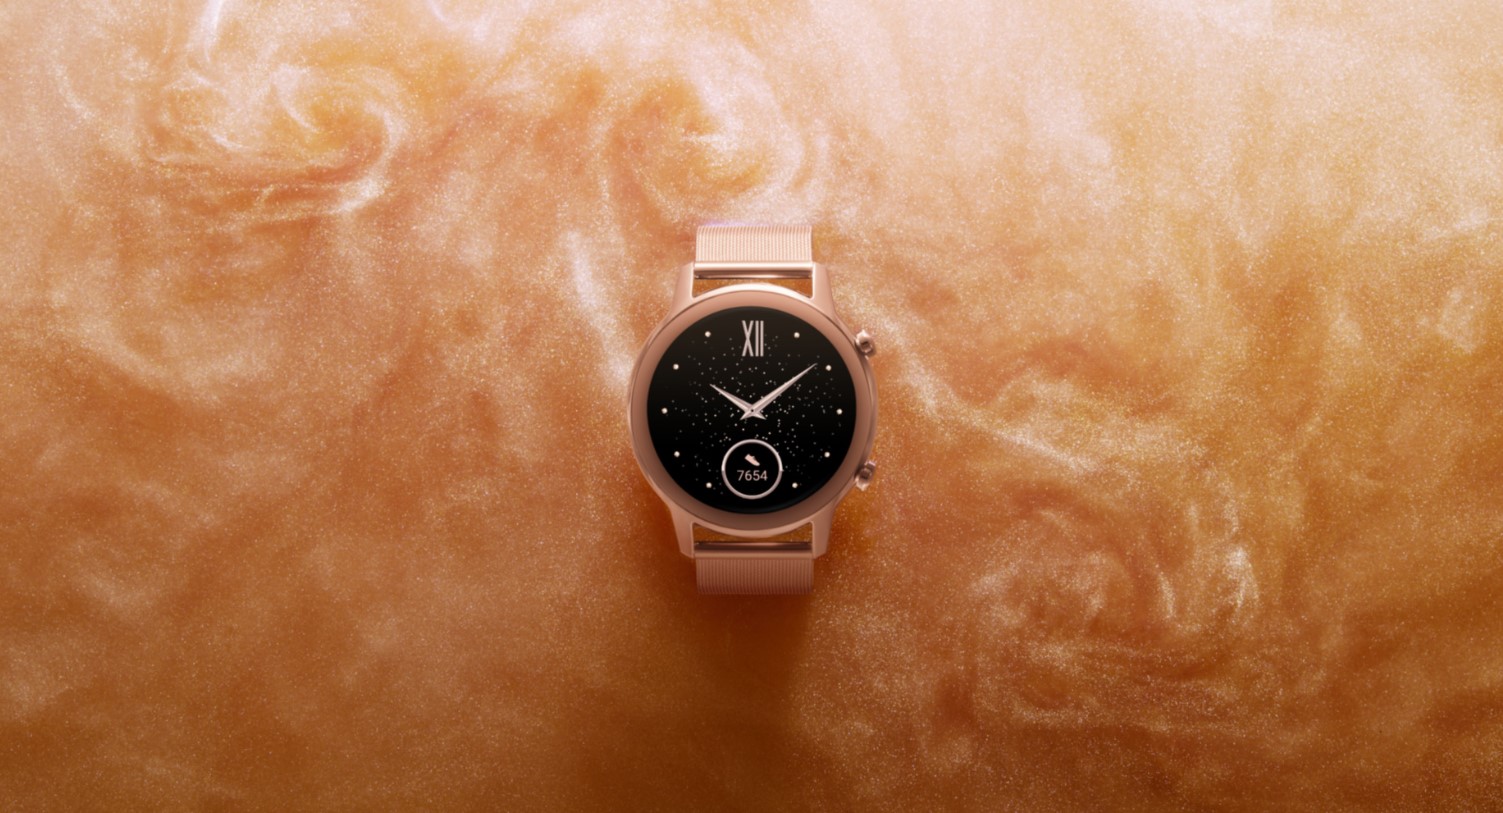 smartwatch Honor MagicWatch 2